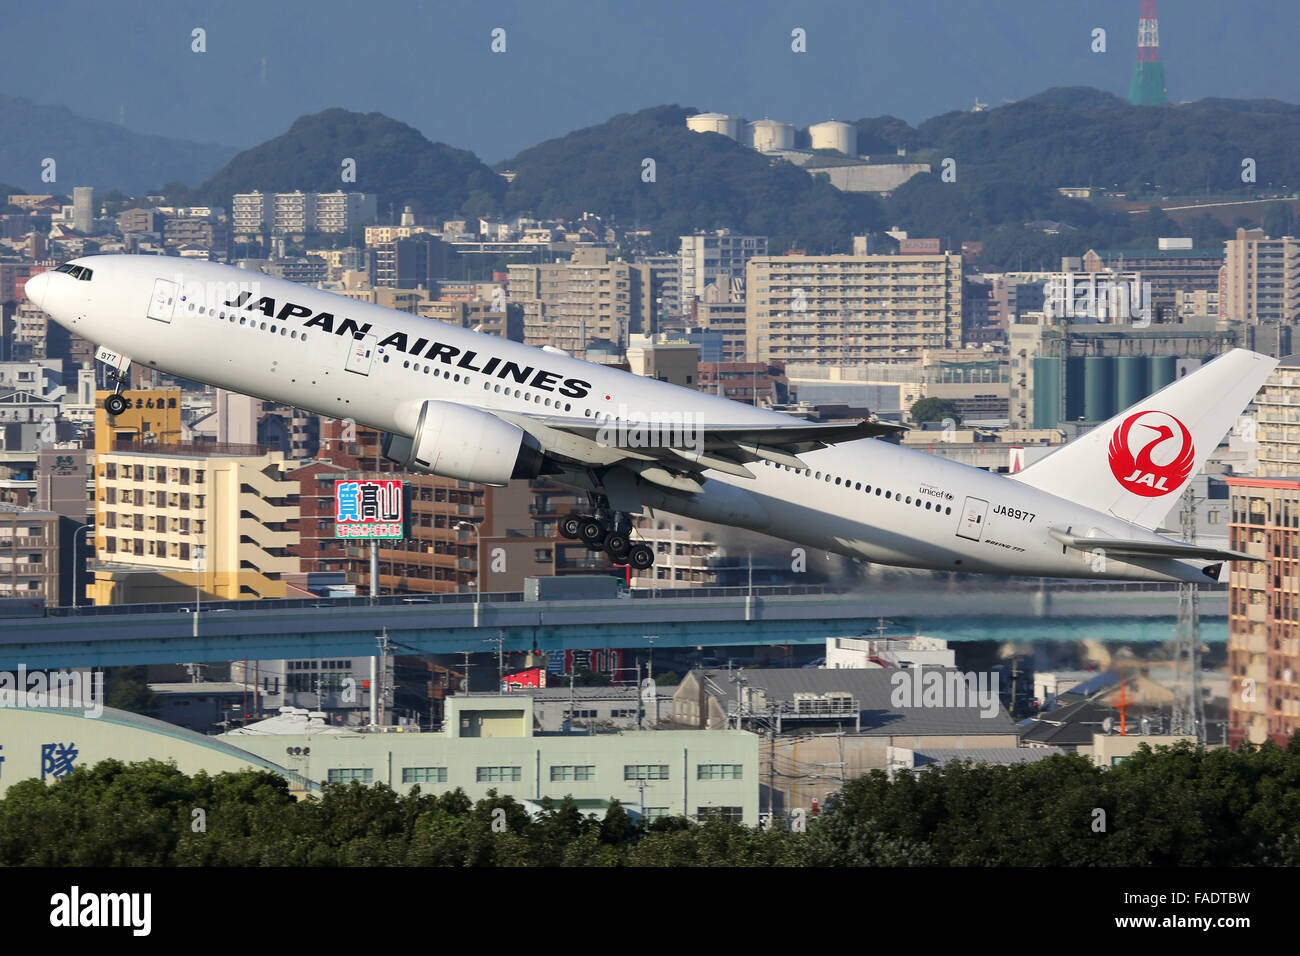 Fukuoka, Japan - October 13, 2015: A Japan Airlines Boeing 777-200 with the registration JA8977 takes off from Fukuoka Airport ( Stock Photo